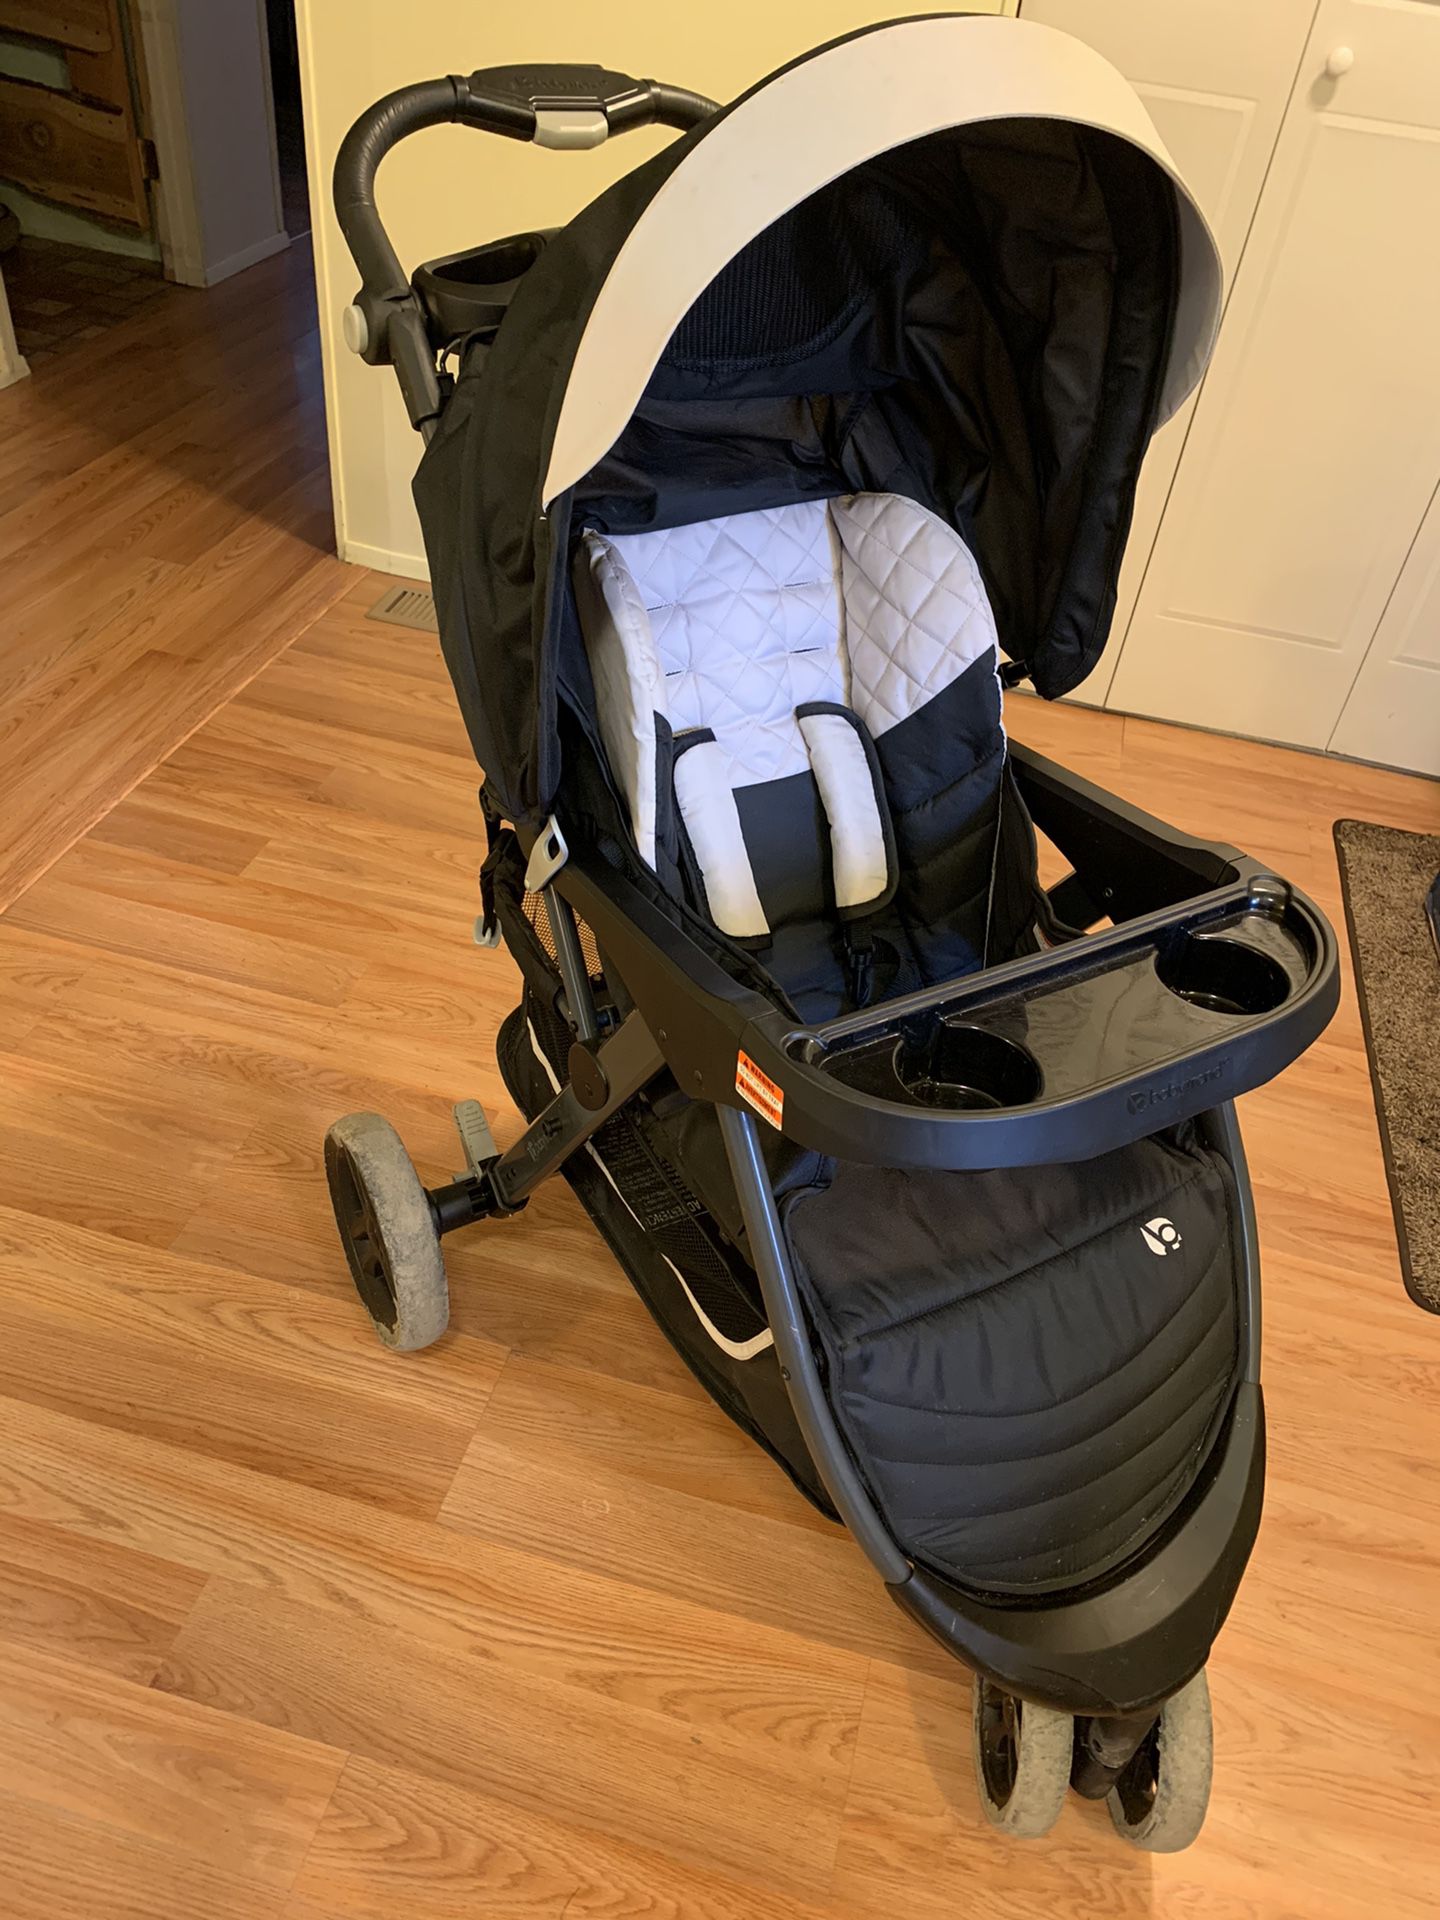 Baby Trend stroller/car seat combo